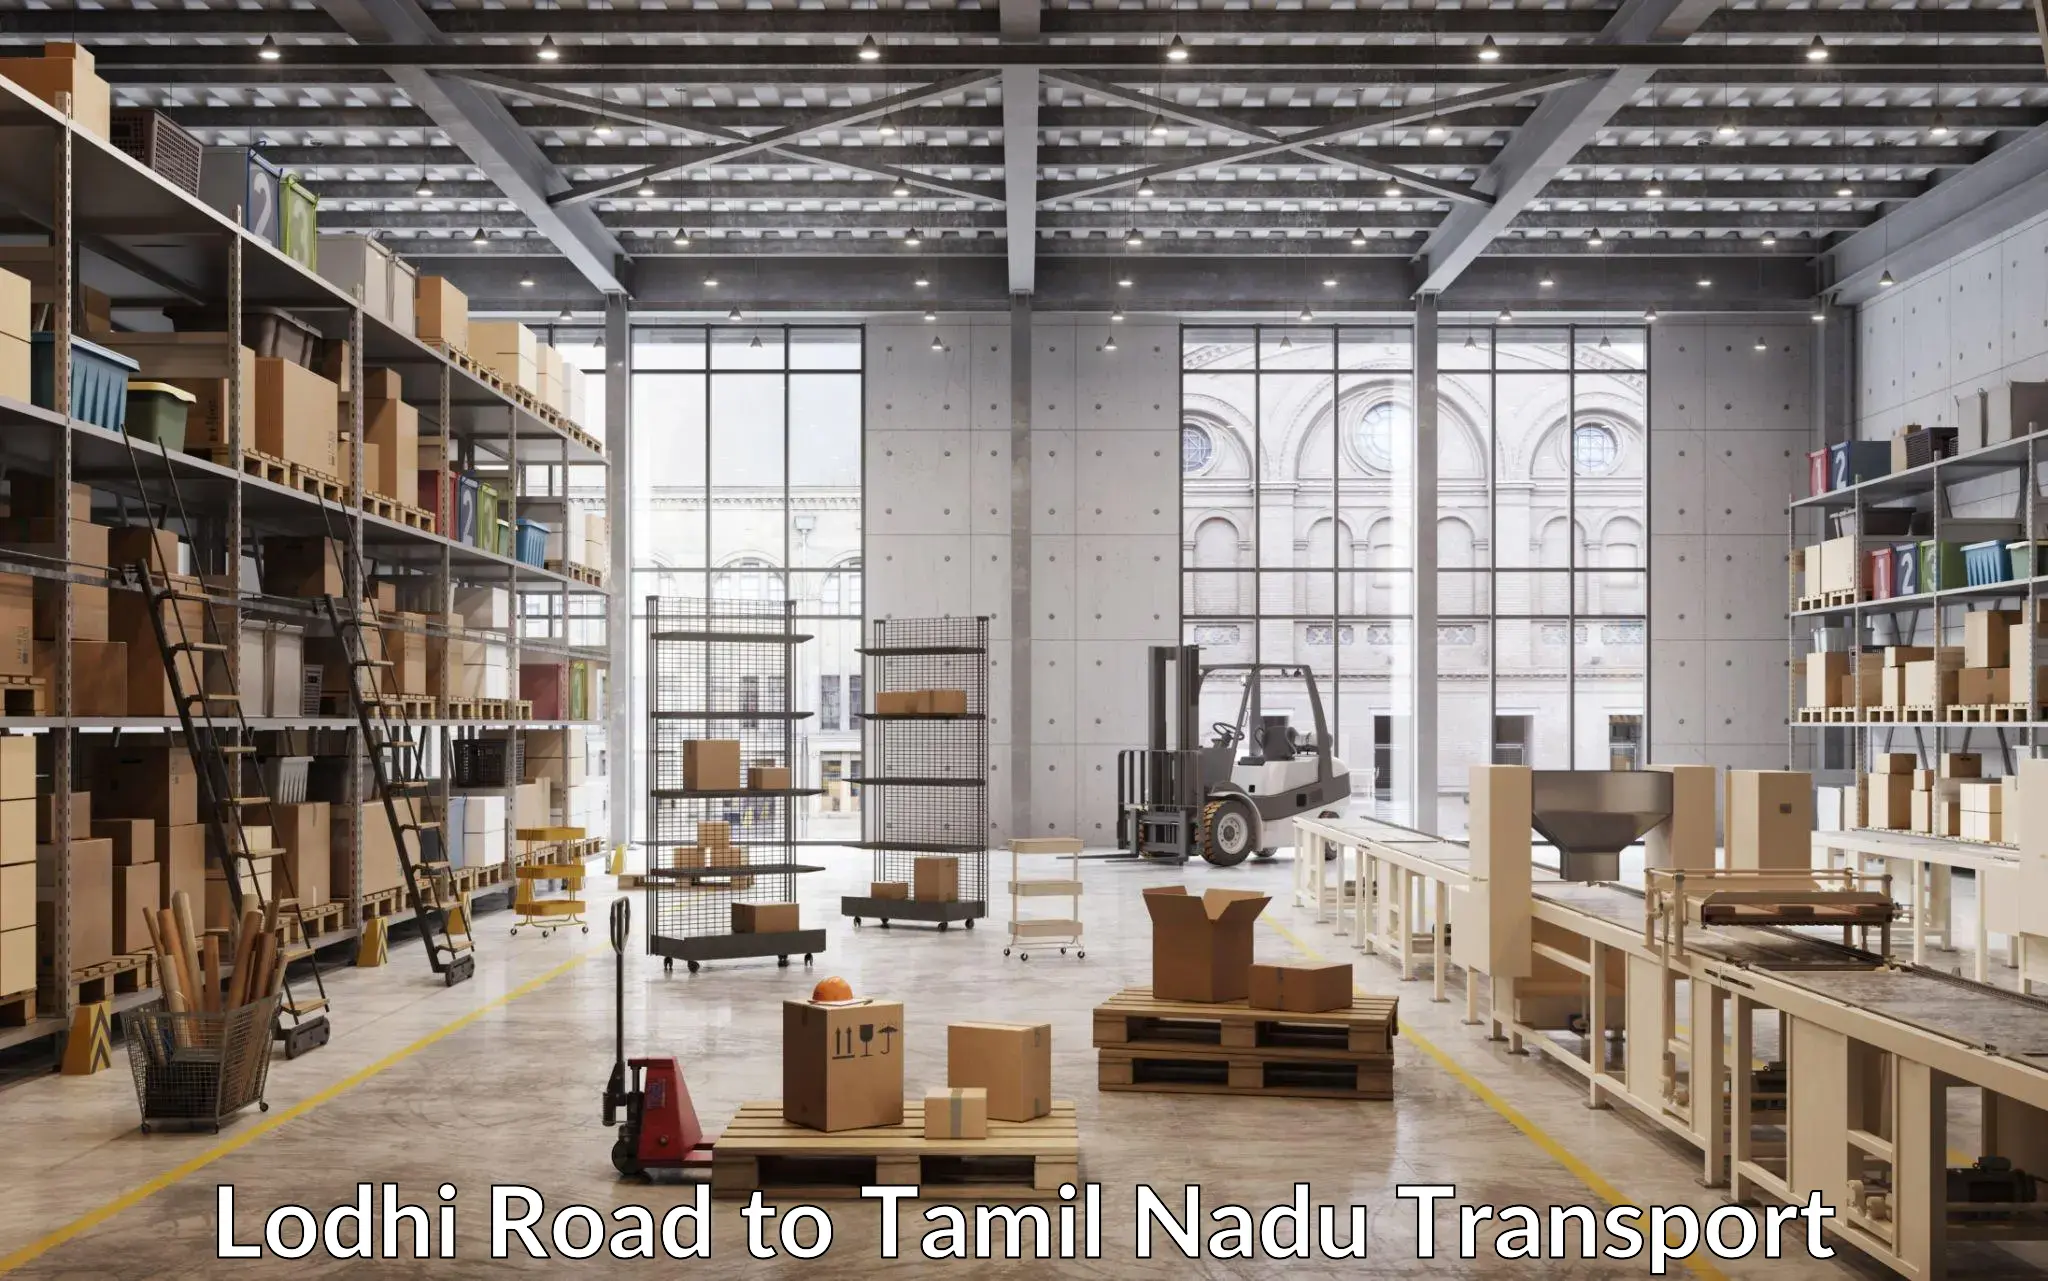 Sending bike to another city Lodhi Road to Tamil Nadu